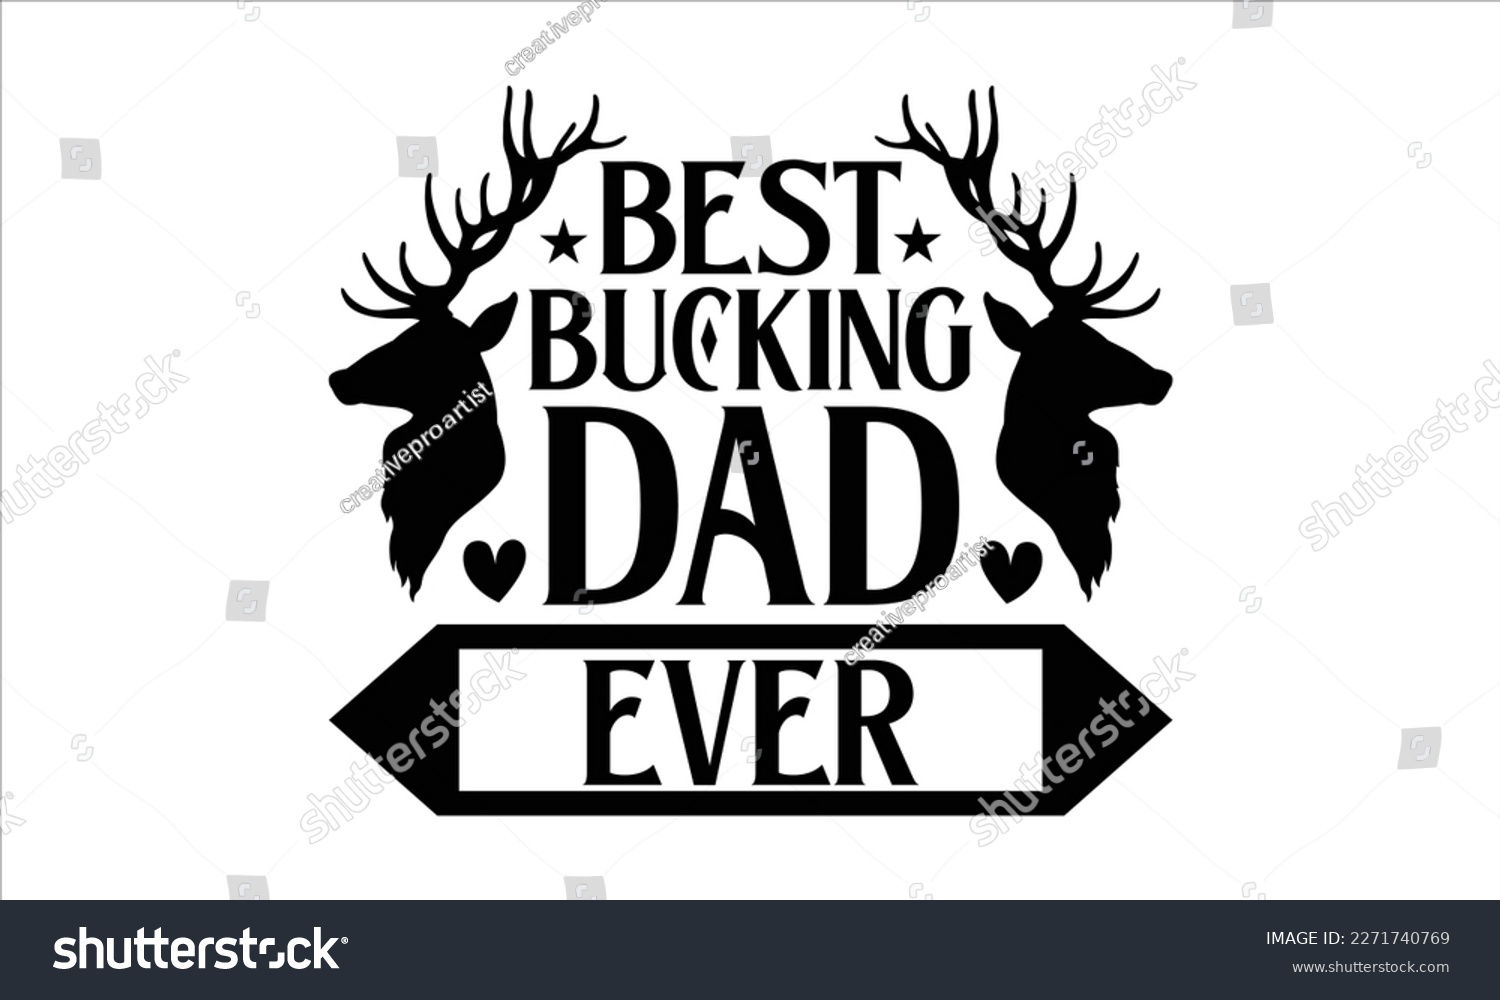 SVG of Best buckin dad ever- Father's Day svg design, Hand drawn lettering phrase isolated on white background, Illustration for prints on t-shirts and bags, posters, cards eps 10. svg